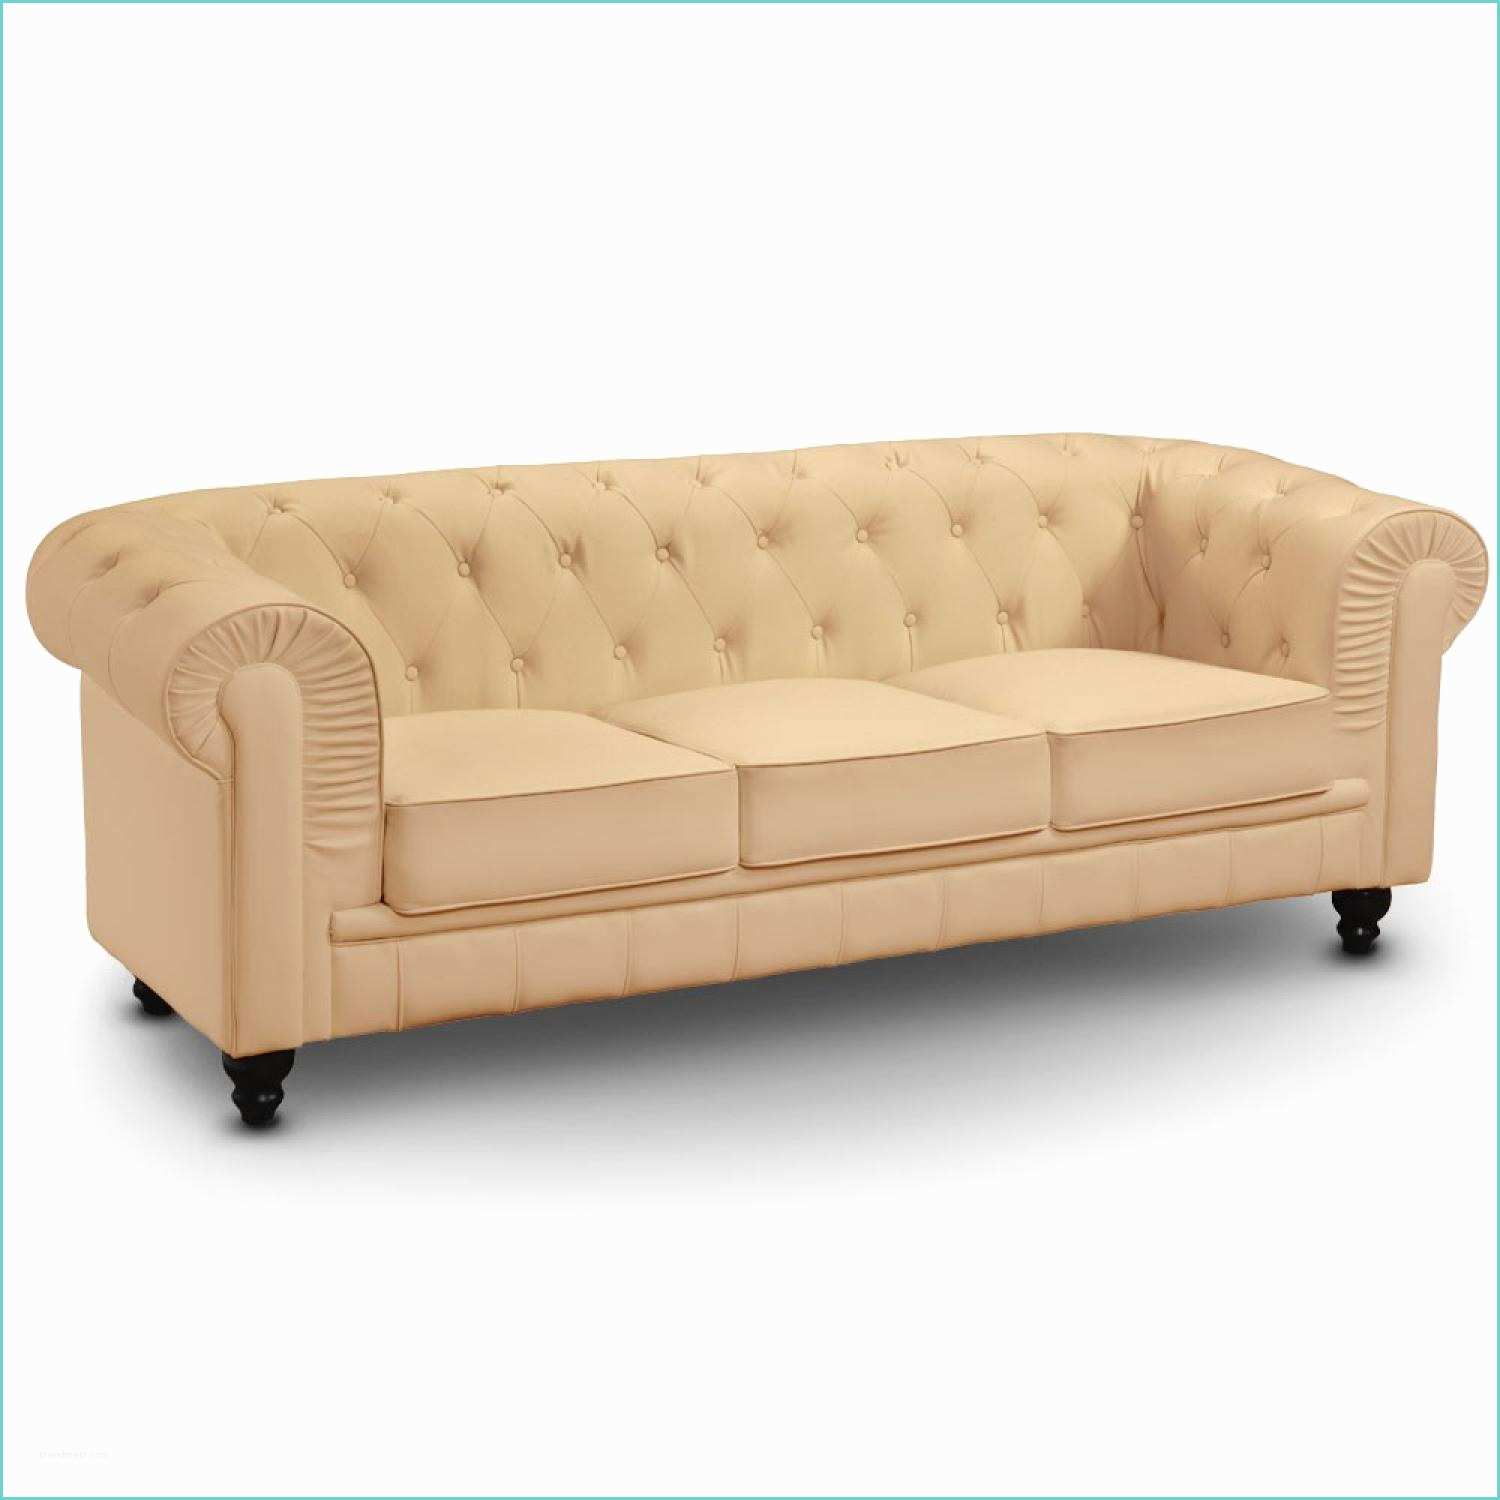 Canap Chesterfield Tissu Beige S Canapé Chesterfield Tissu Beige